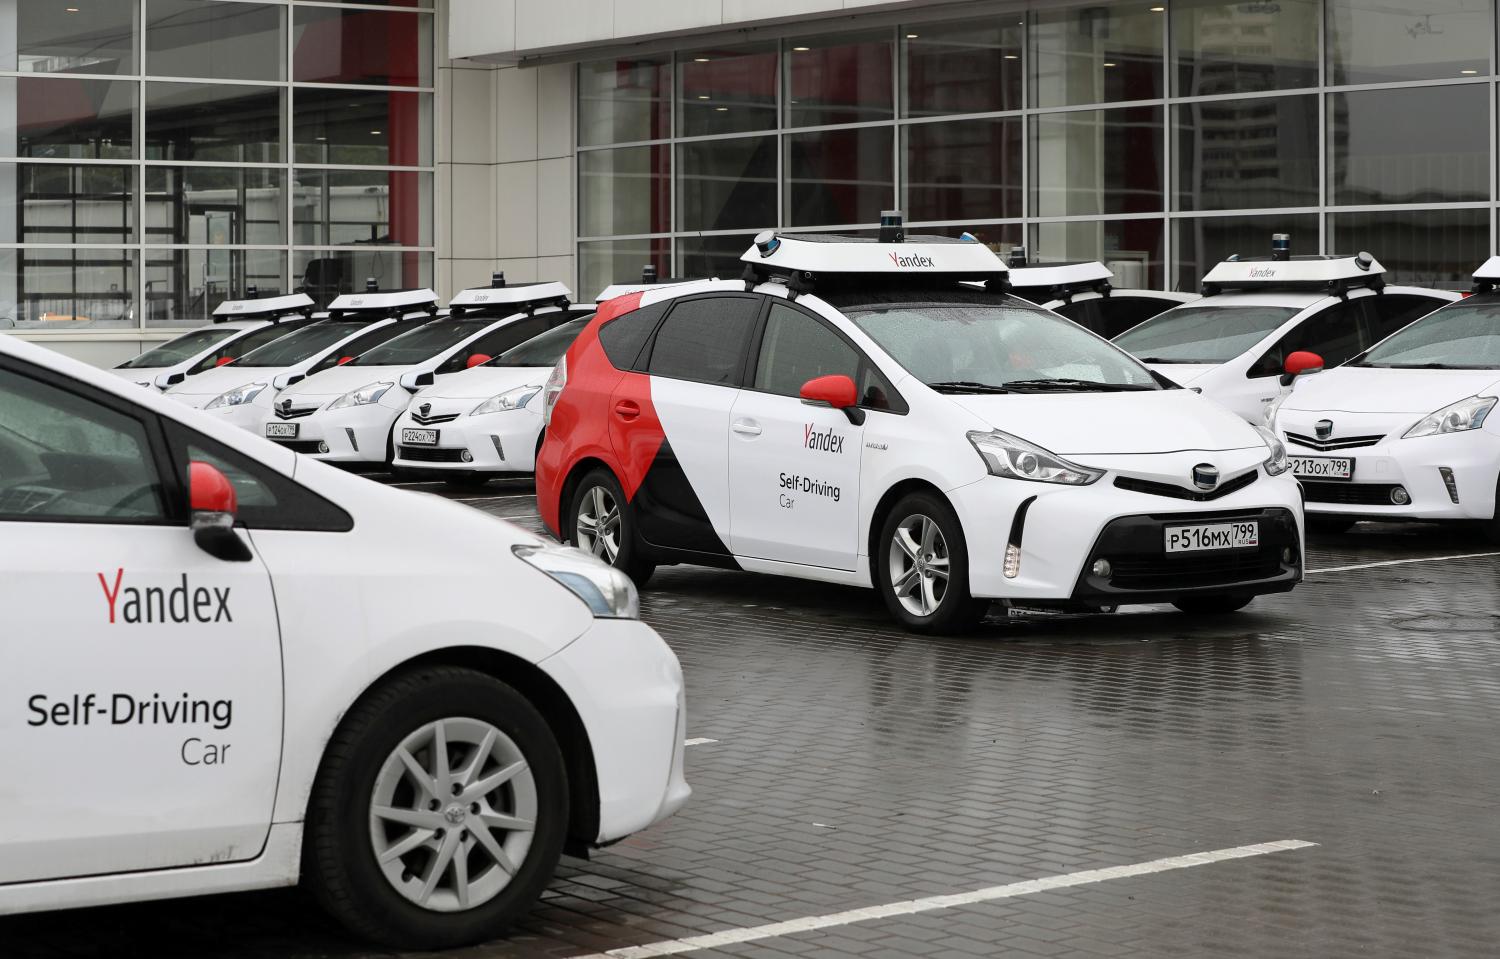 A view shows self-driving cars owned and tested by Yandex company during a presentation in Moscow, Russia August 16, 2019. Picture taken August 16, 2019. REUTERS/Evgenia Novozhenina - RC1685FF8CC0